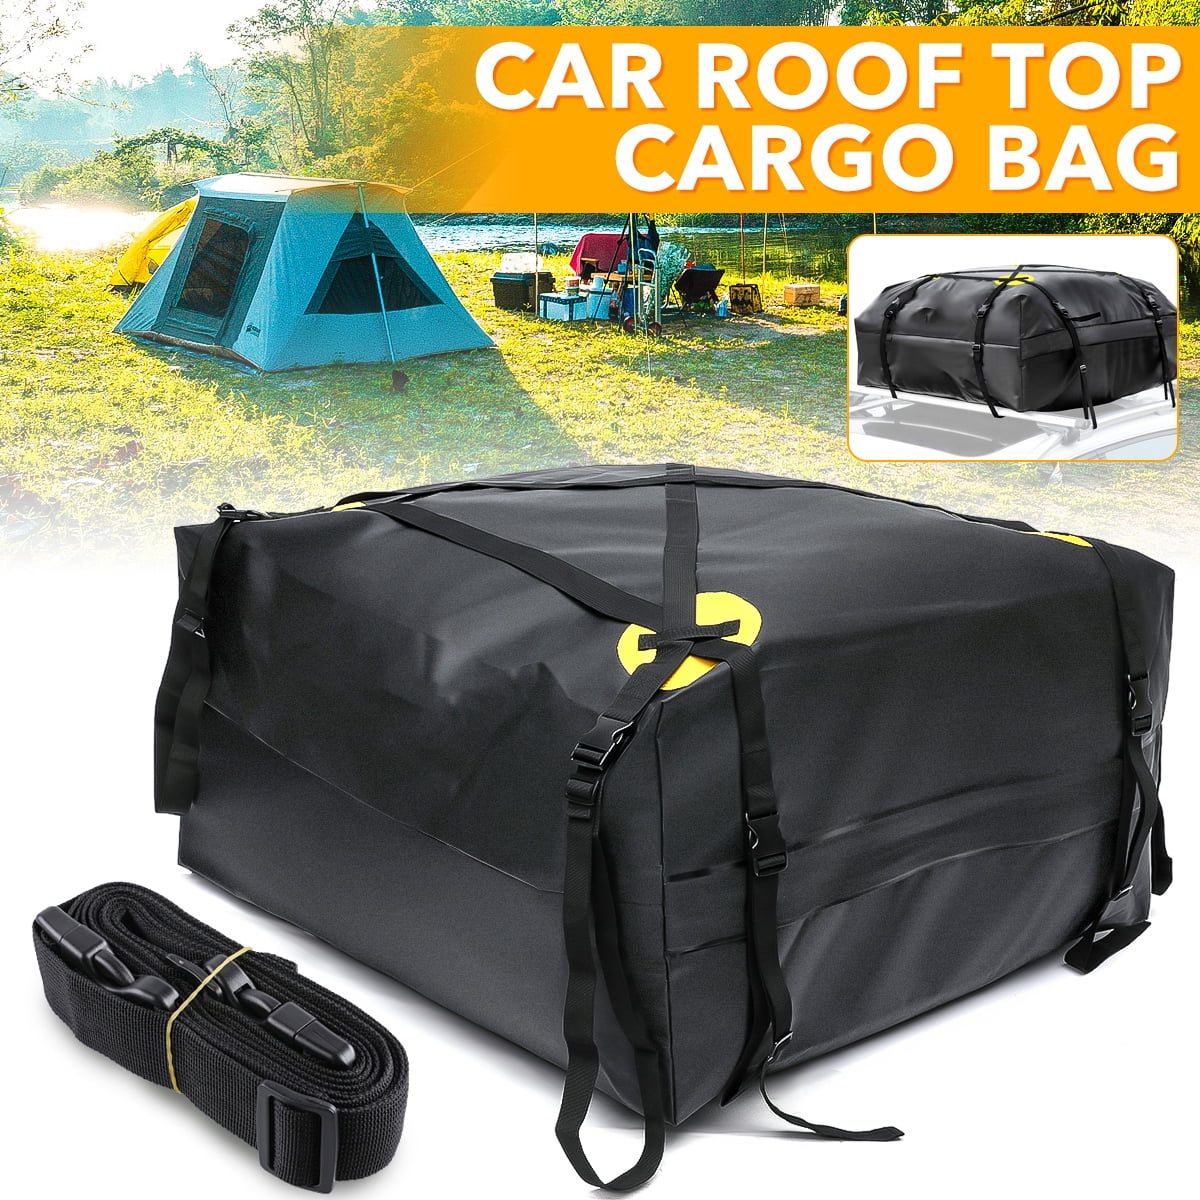 Truck Or SUV Car Roof Bag Car Top Carrier Roof Bag Reinforced 420D Oxford Cloth Waterproof Car Top Luggage Carrier 44 L X 34W X 17H Inches Large Storage Space For Car 